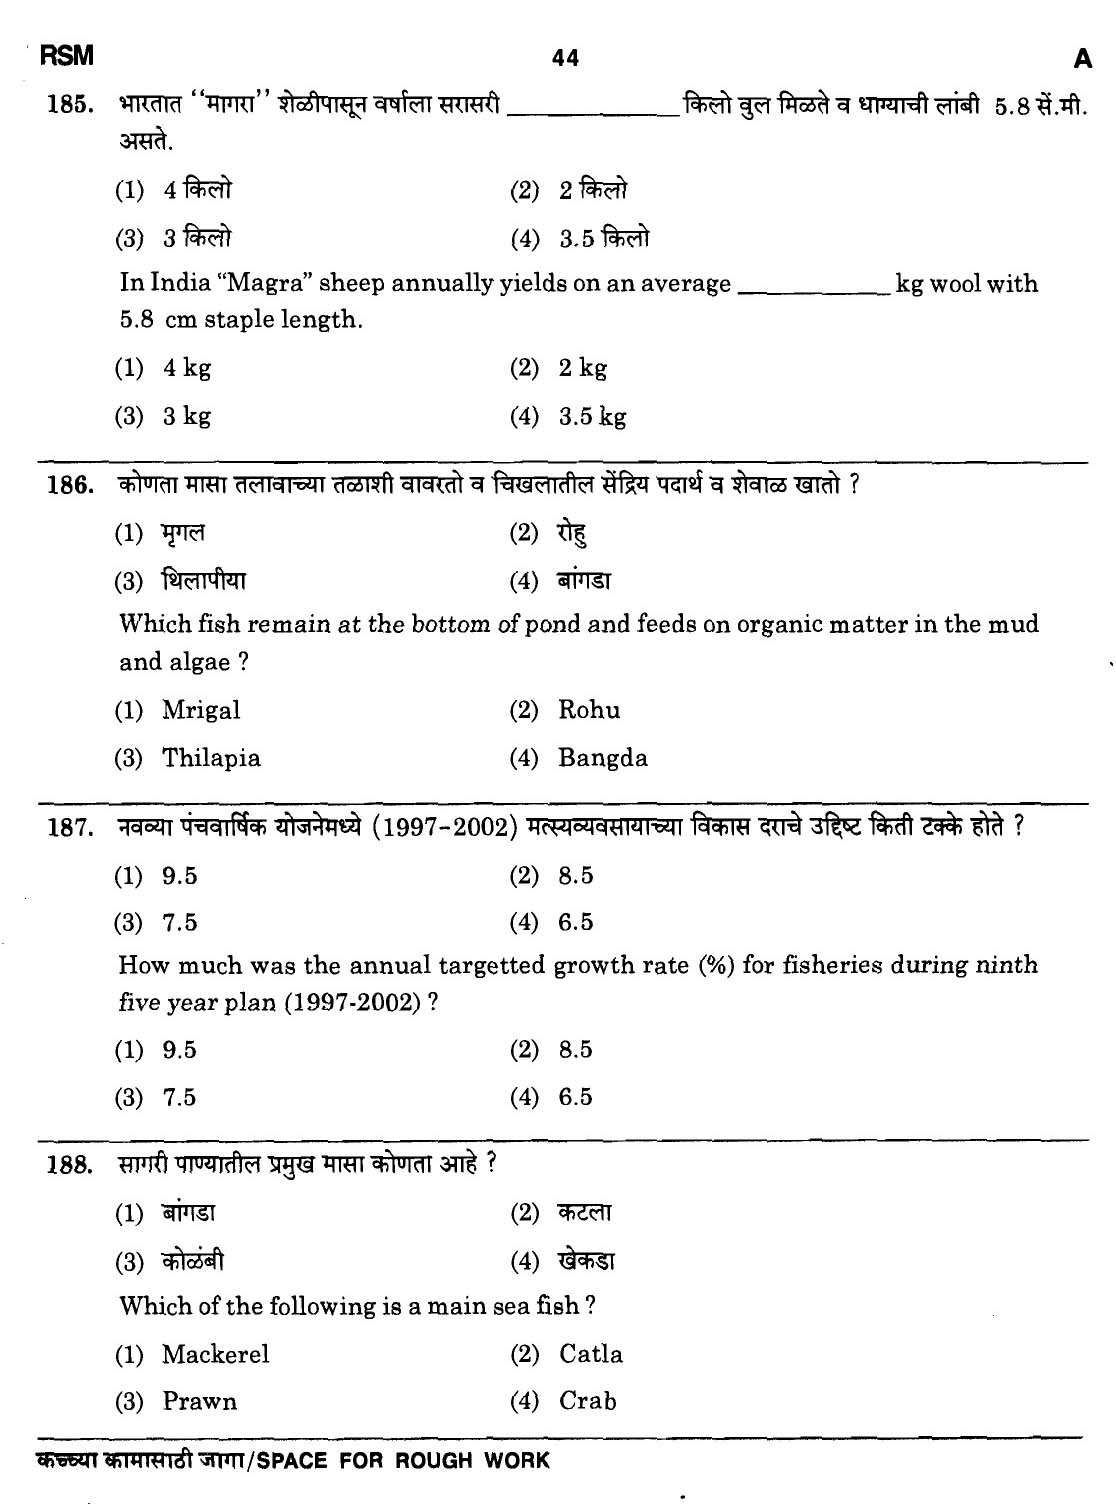 MPSC Agricultural Services Preliminary Exam 2011 Question Paper 43